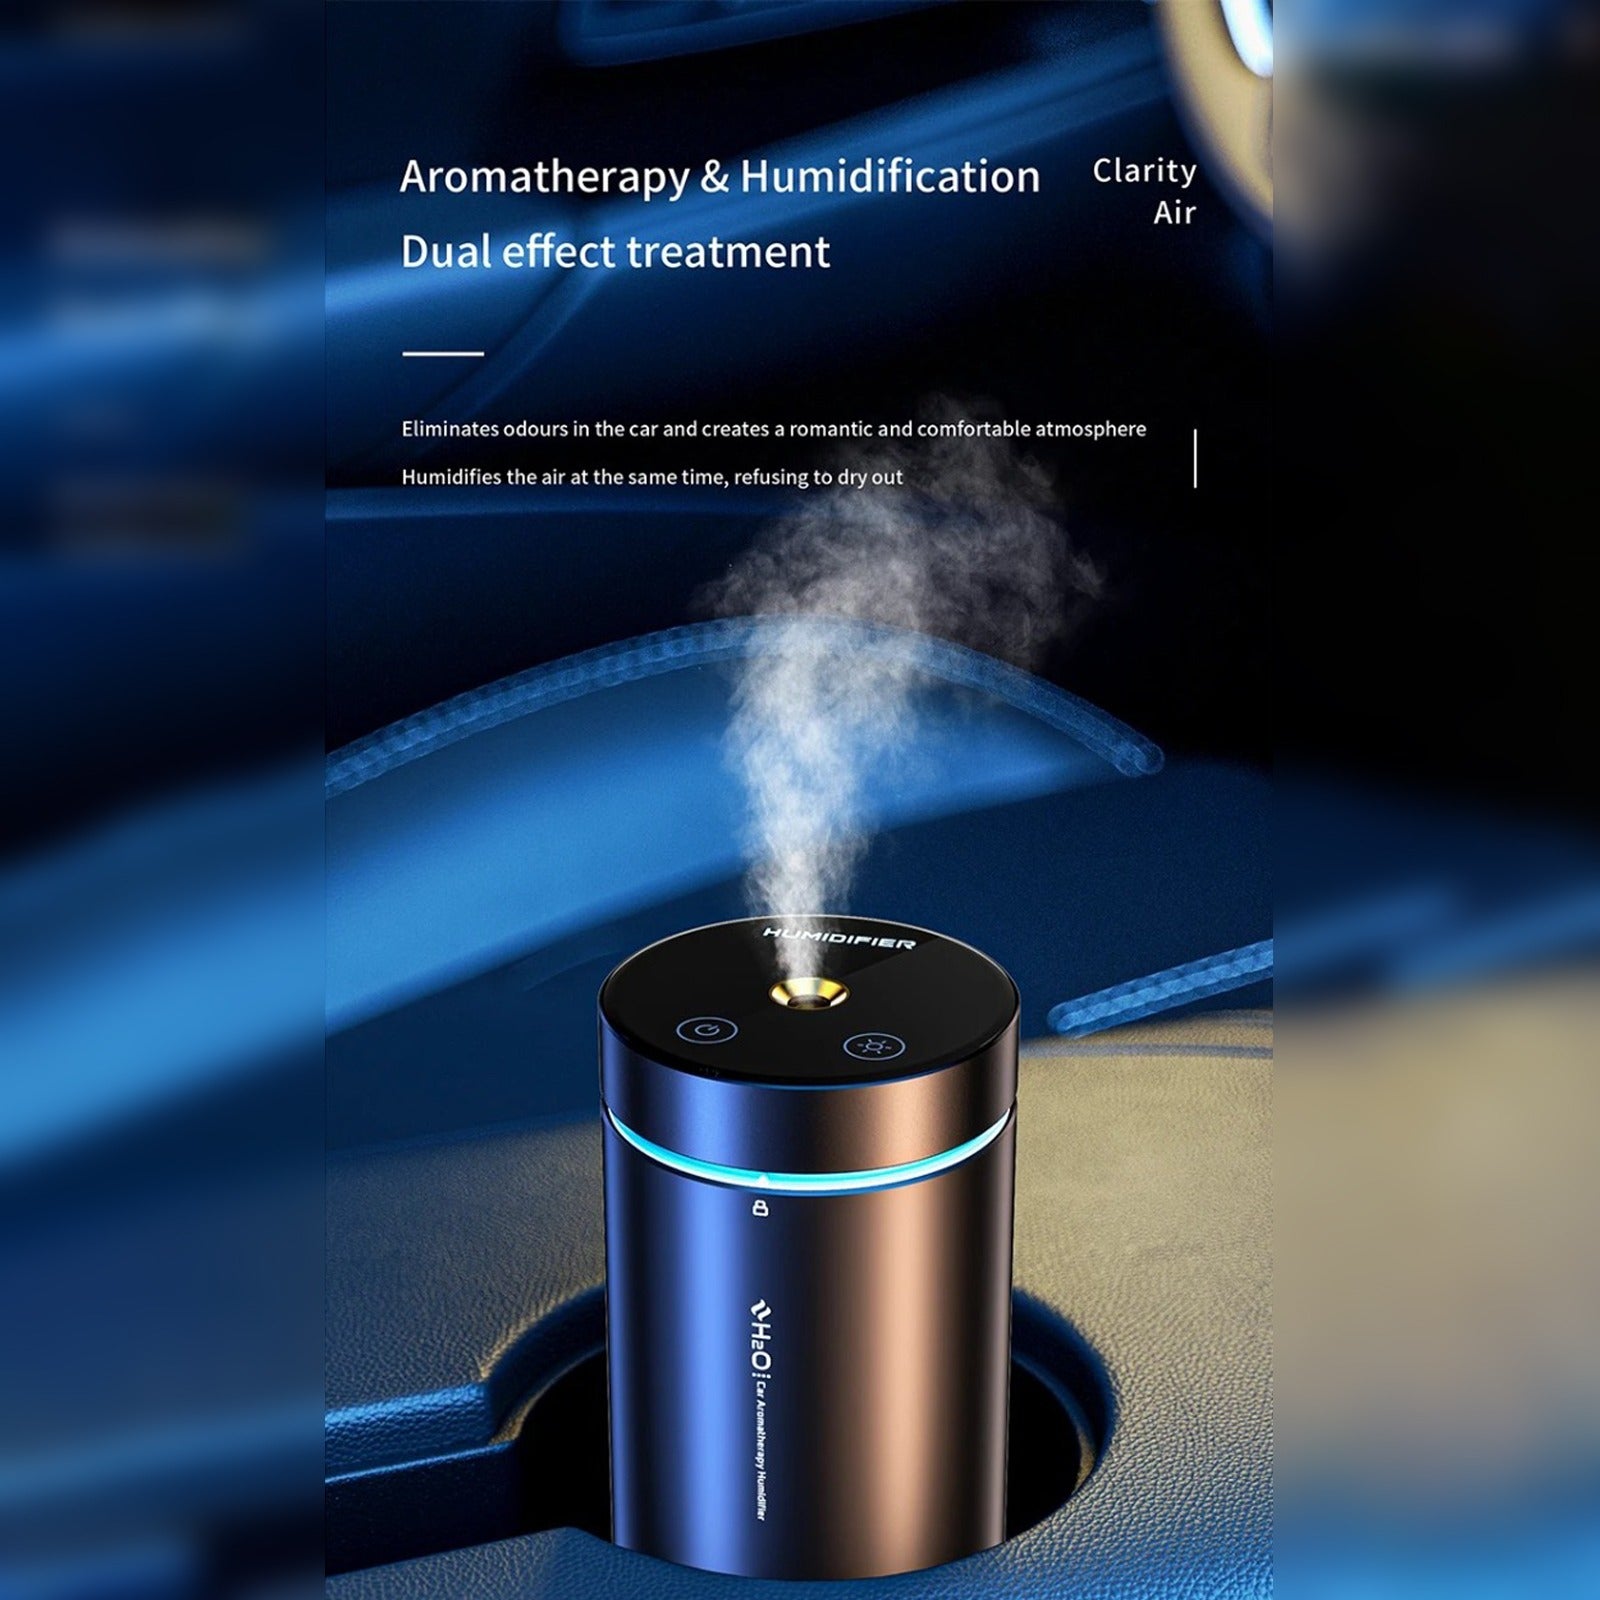 USB car air purifier with humidifier and aromatherapy diffuser for a fresh and healthy driving experience